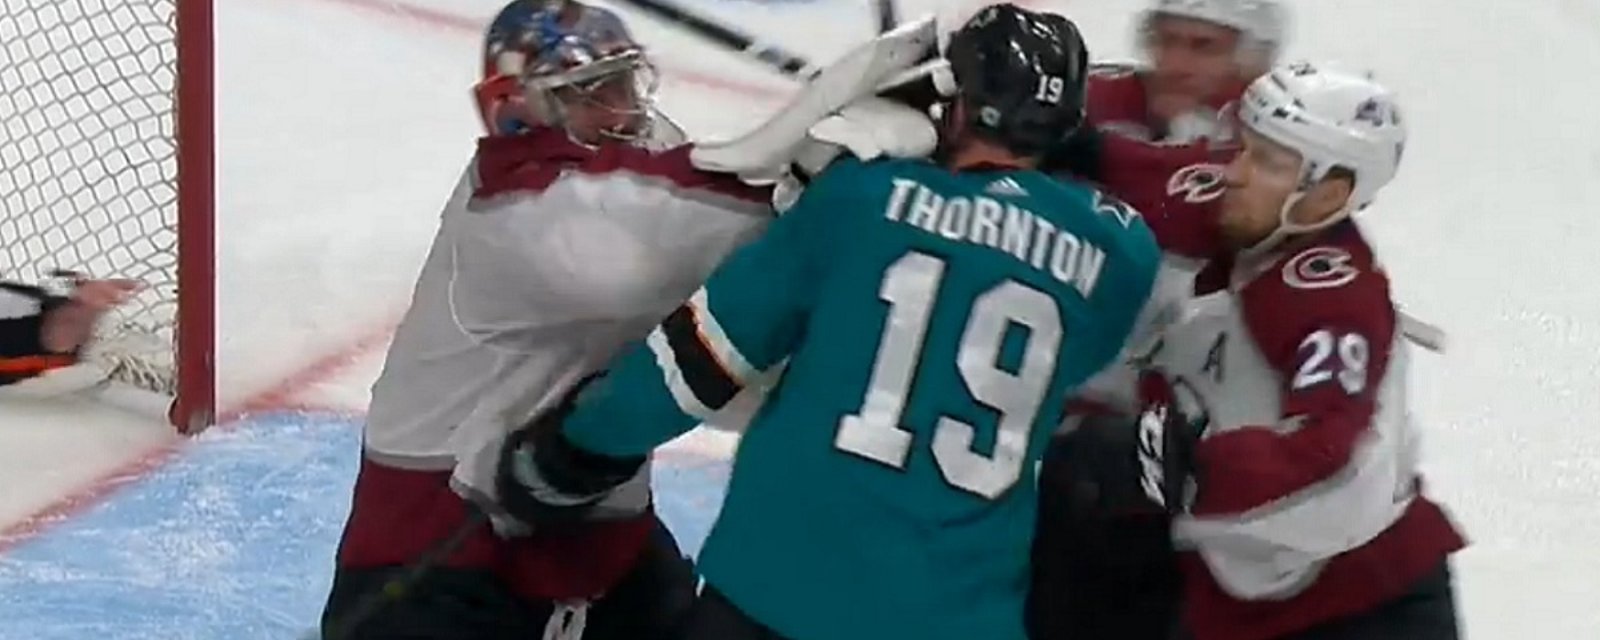 Grubauer and Thornton trade blows in Game 5!